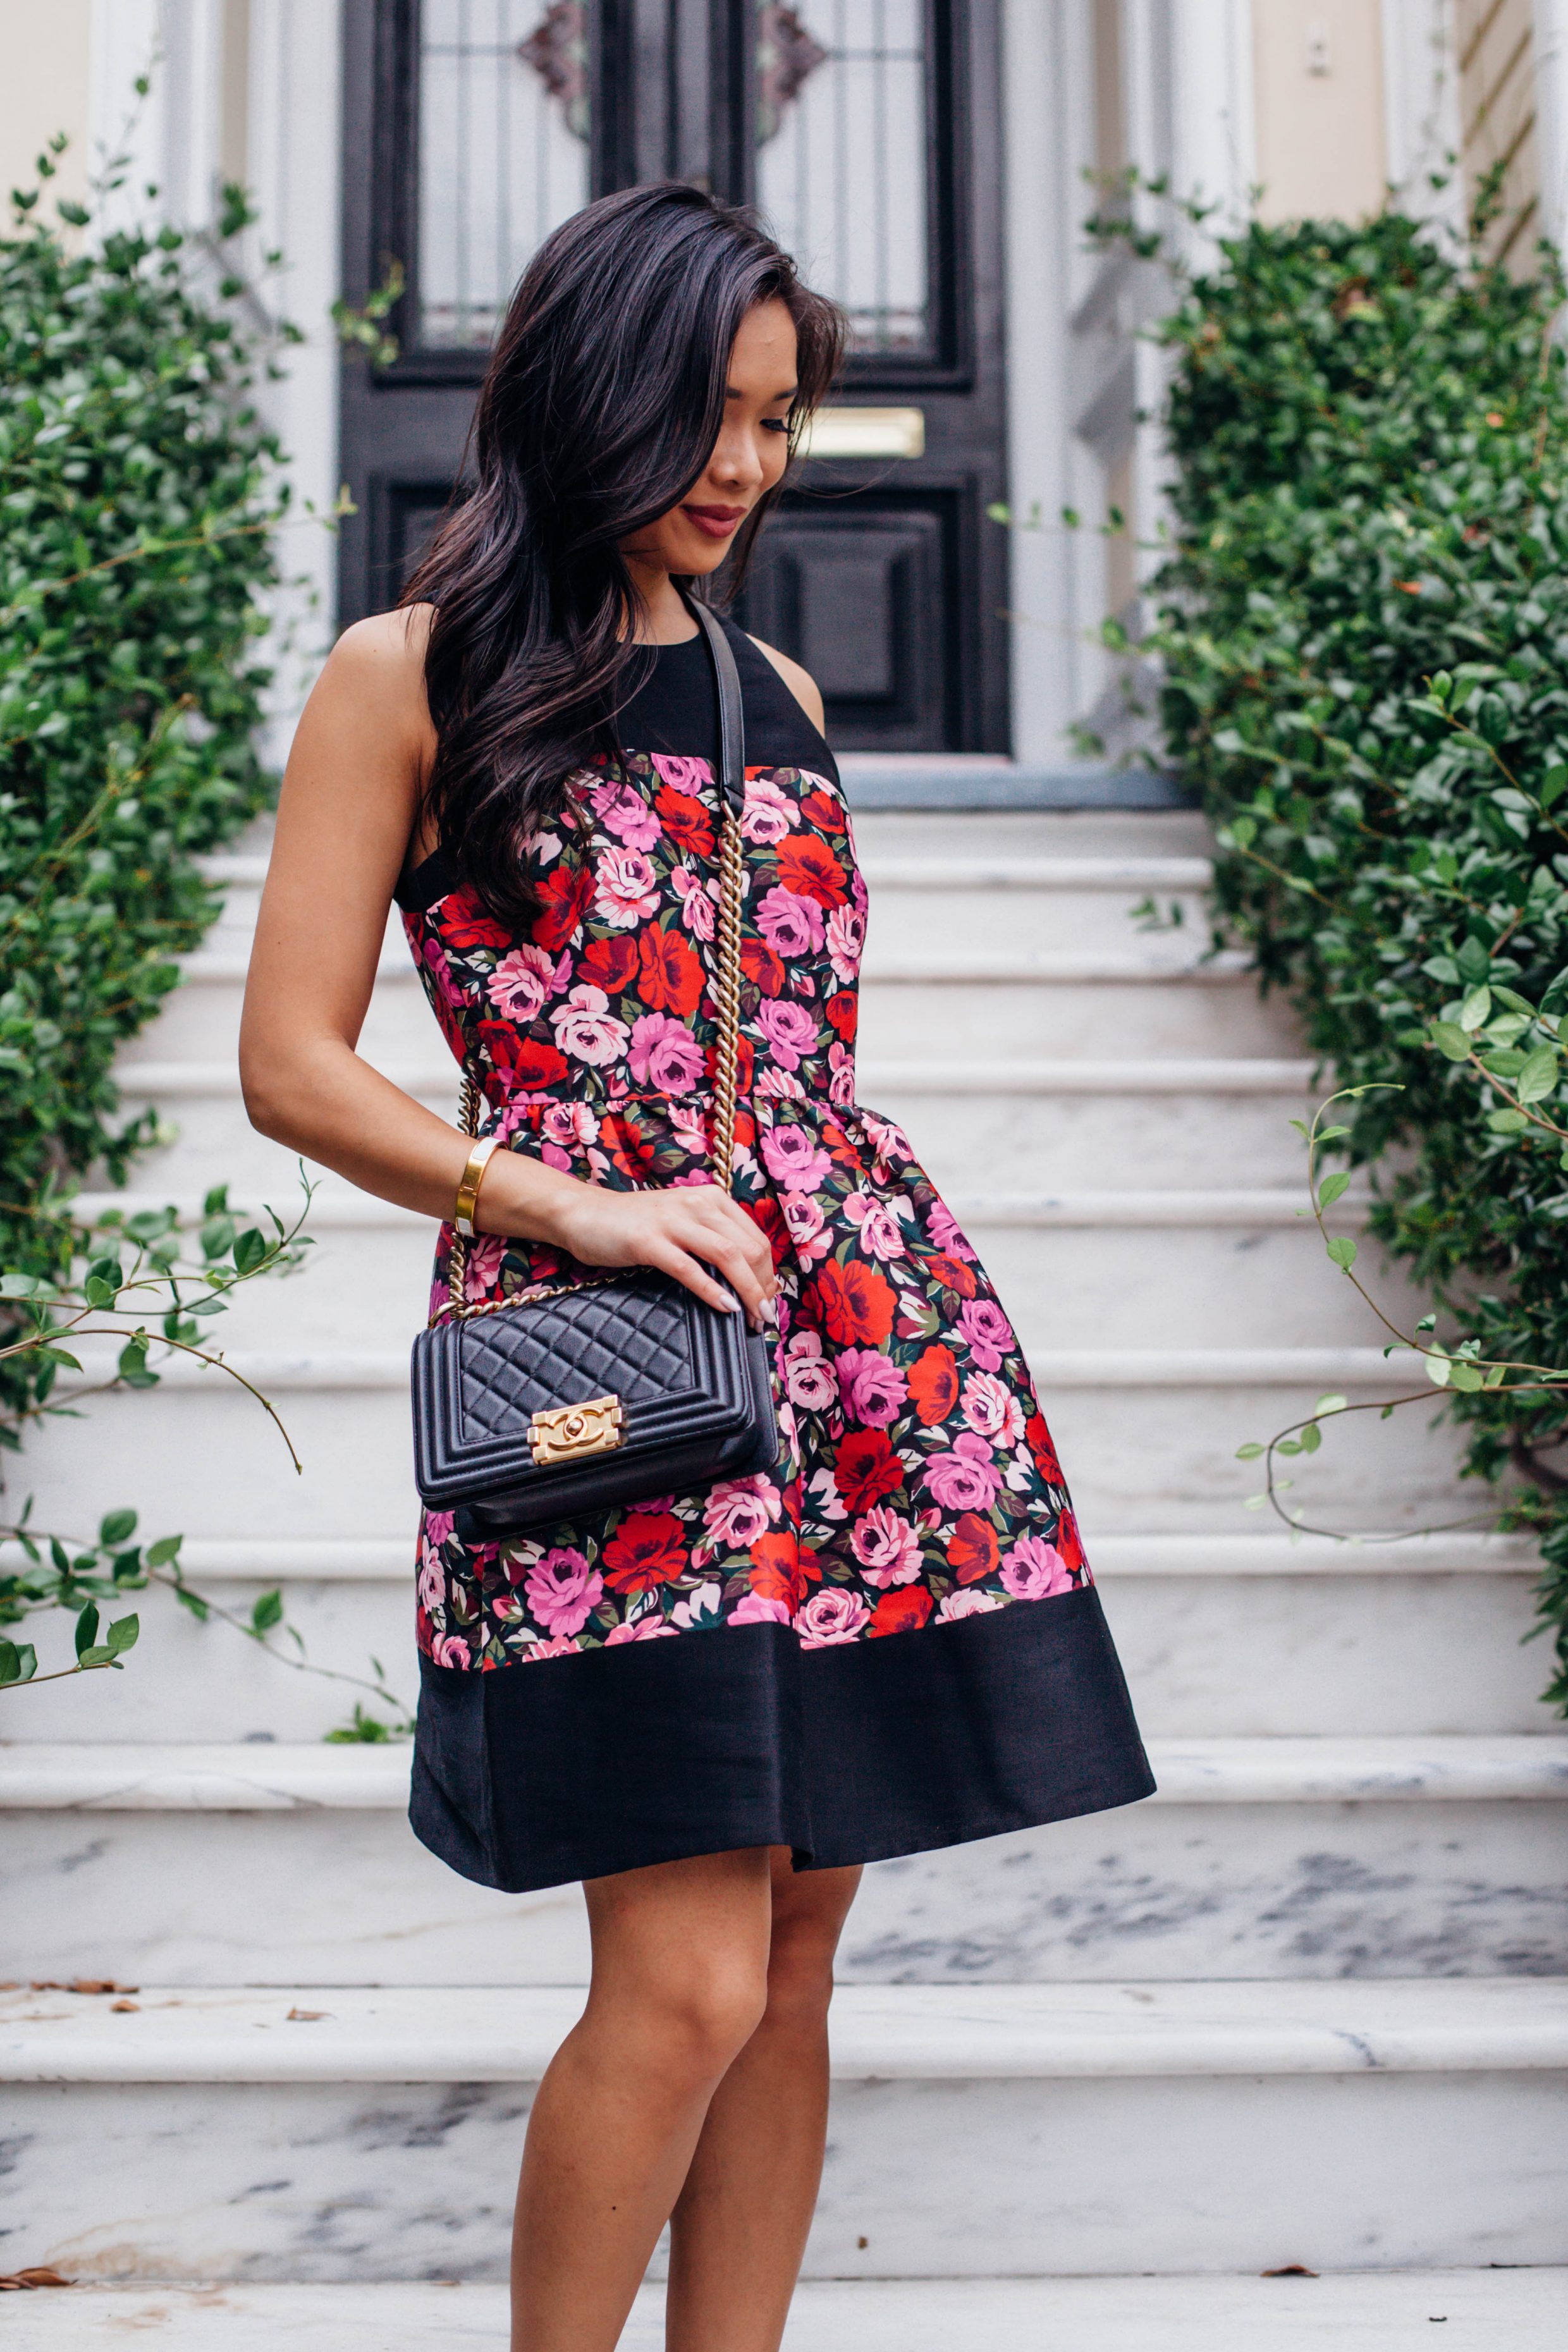 Floral dress with pockets and Chanel boy bag